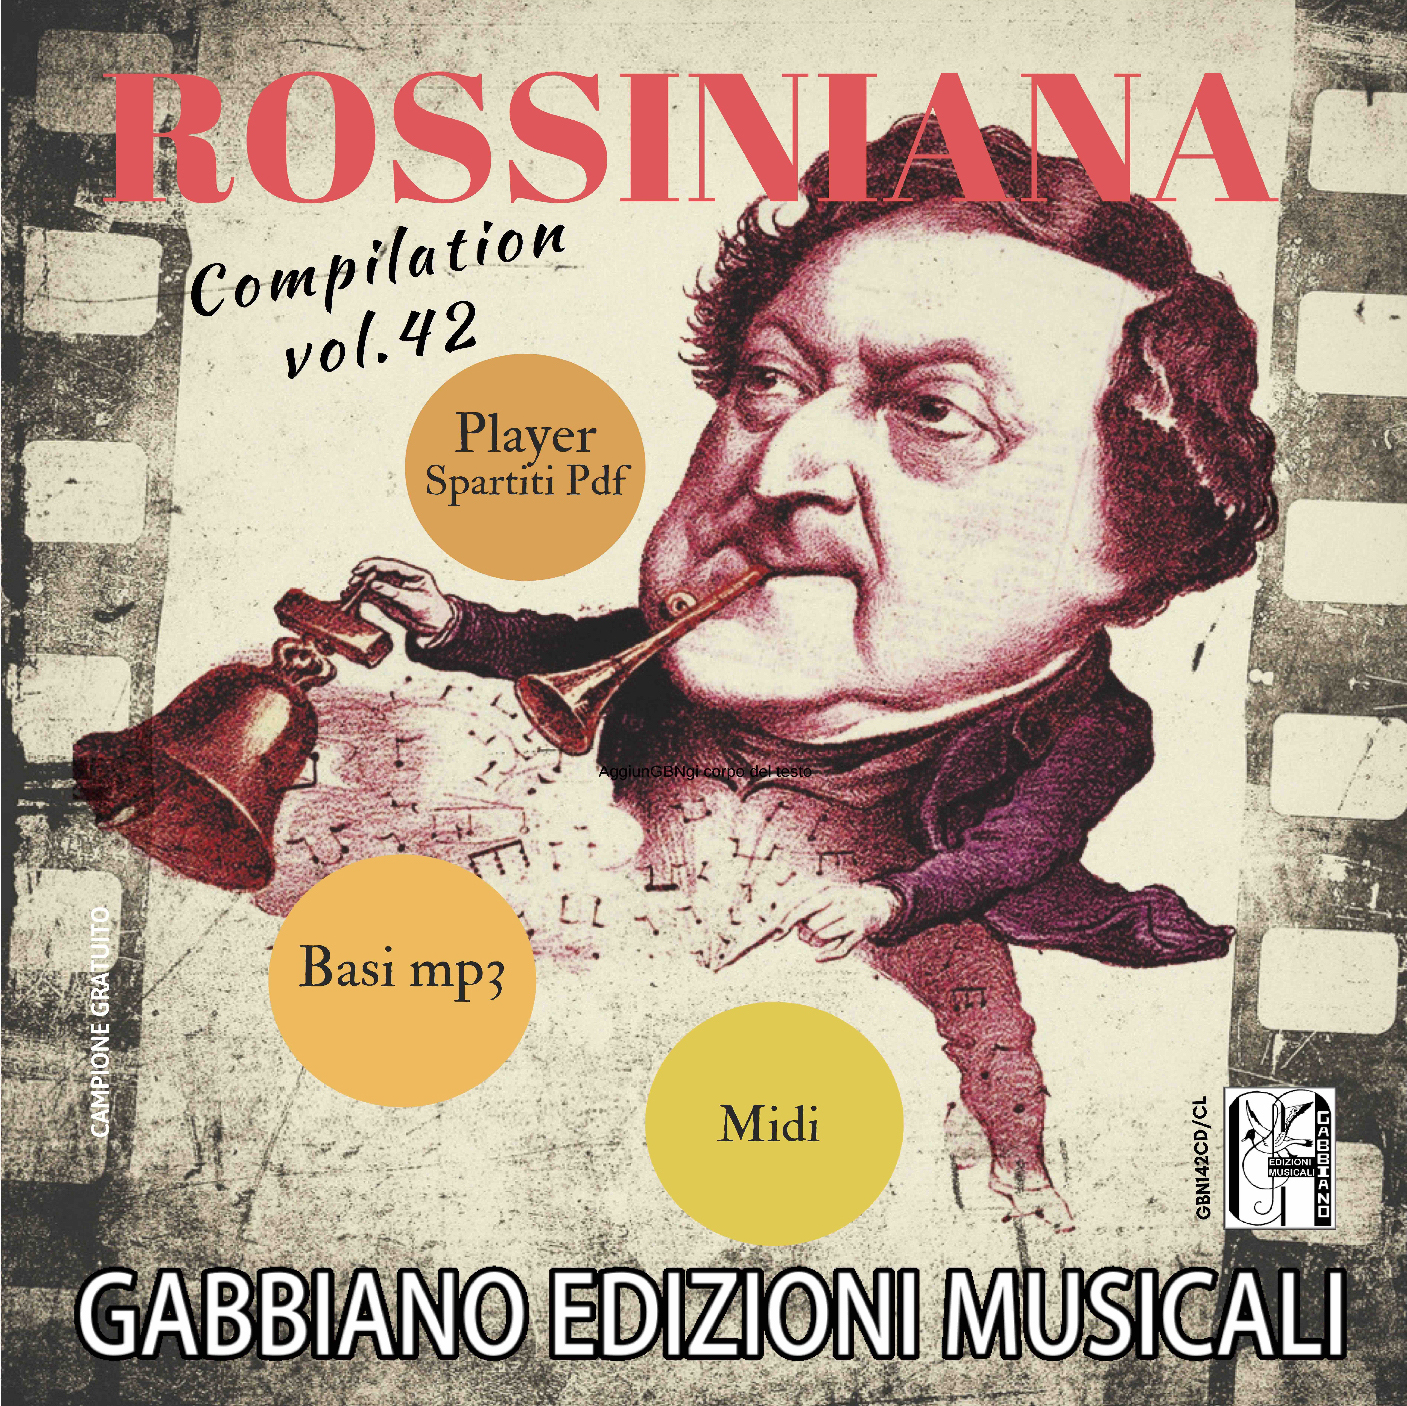 GBN142CD/CL - ROSSINIANA (compilation) - Volume 42